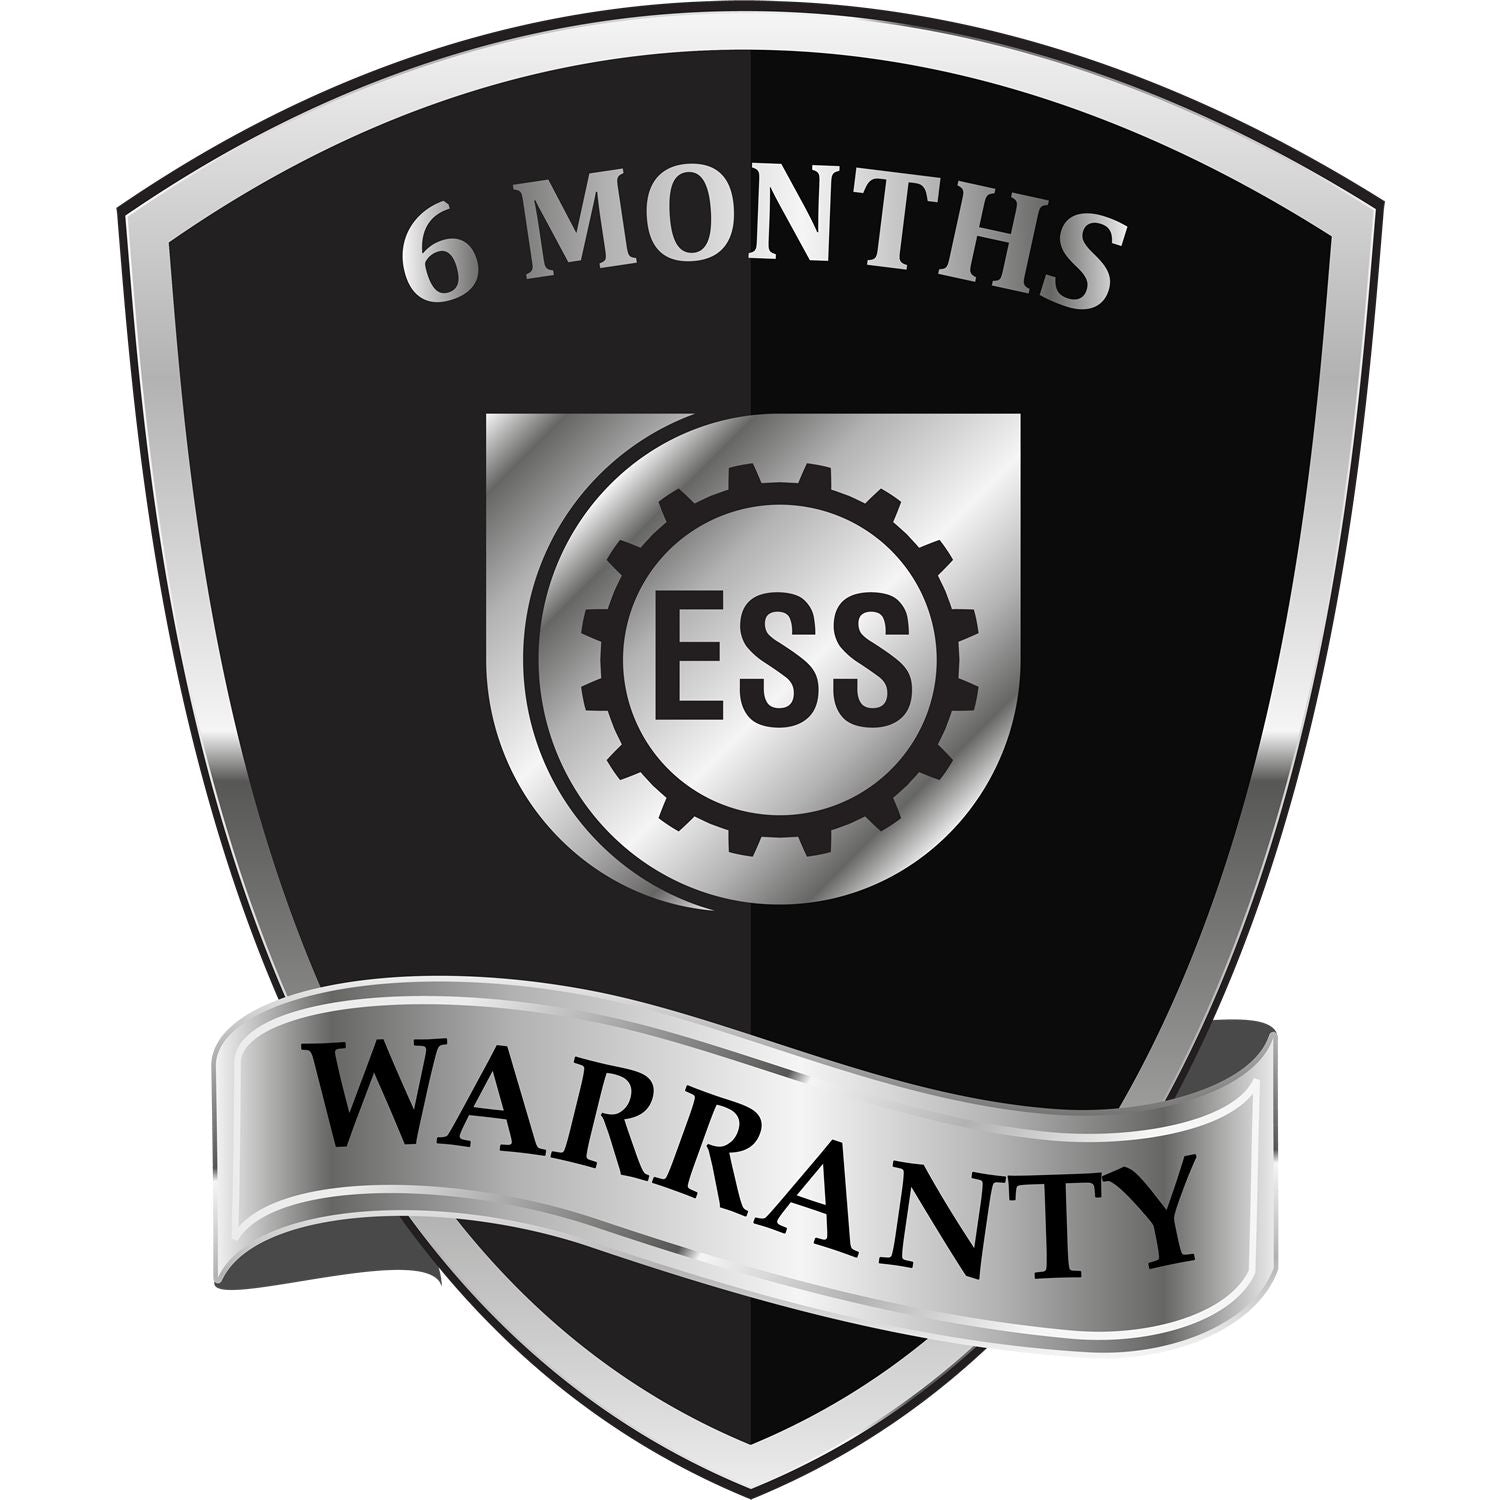 A badge or emblem showing a warranty icon for the Mississippi Professional Engineer Seal Stamp